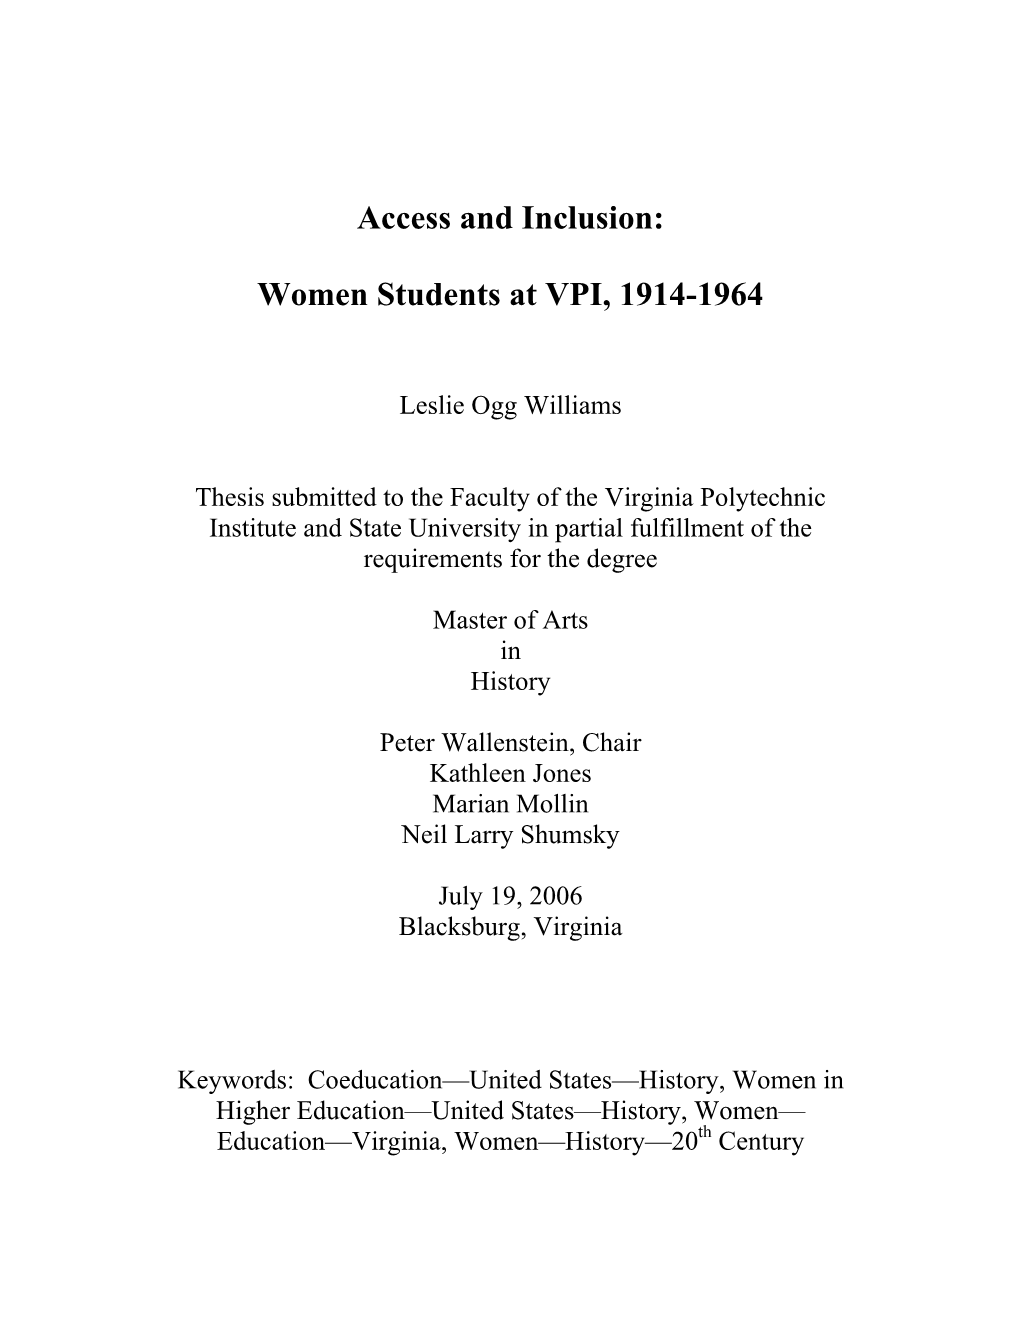 Access and Inclusion: Women Students at VPI, 1914-1964